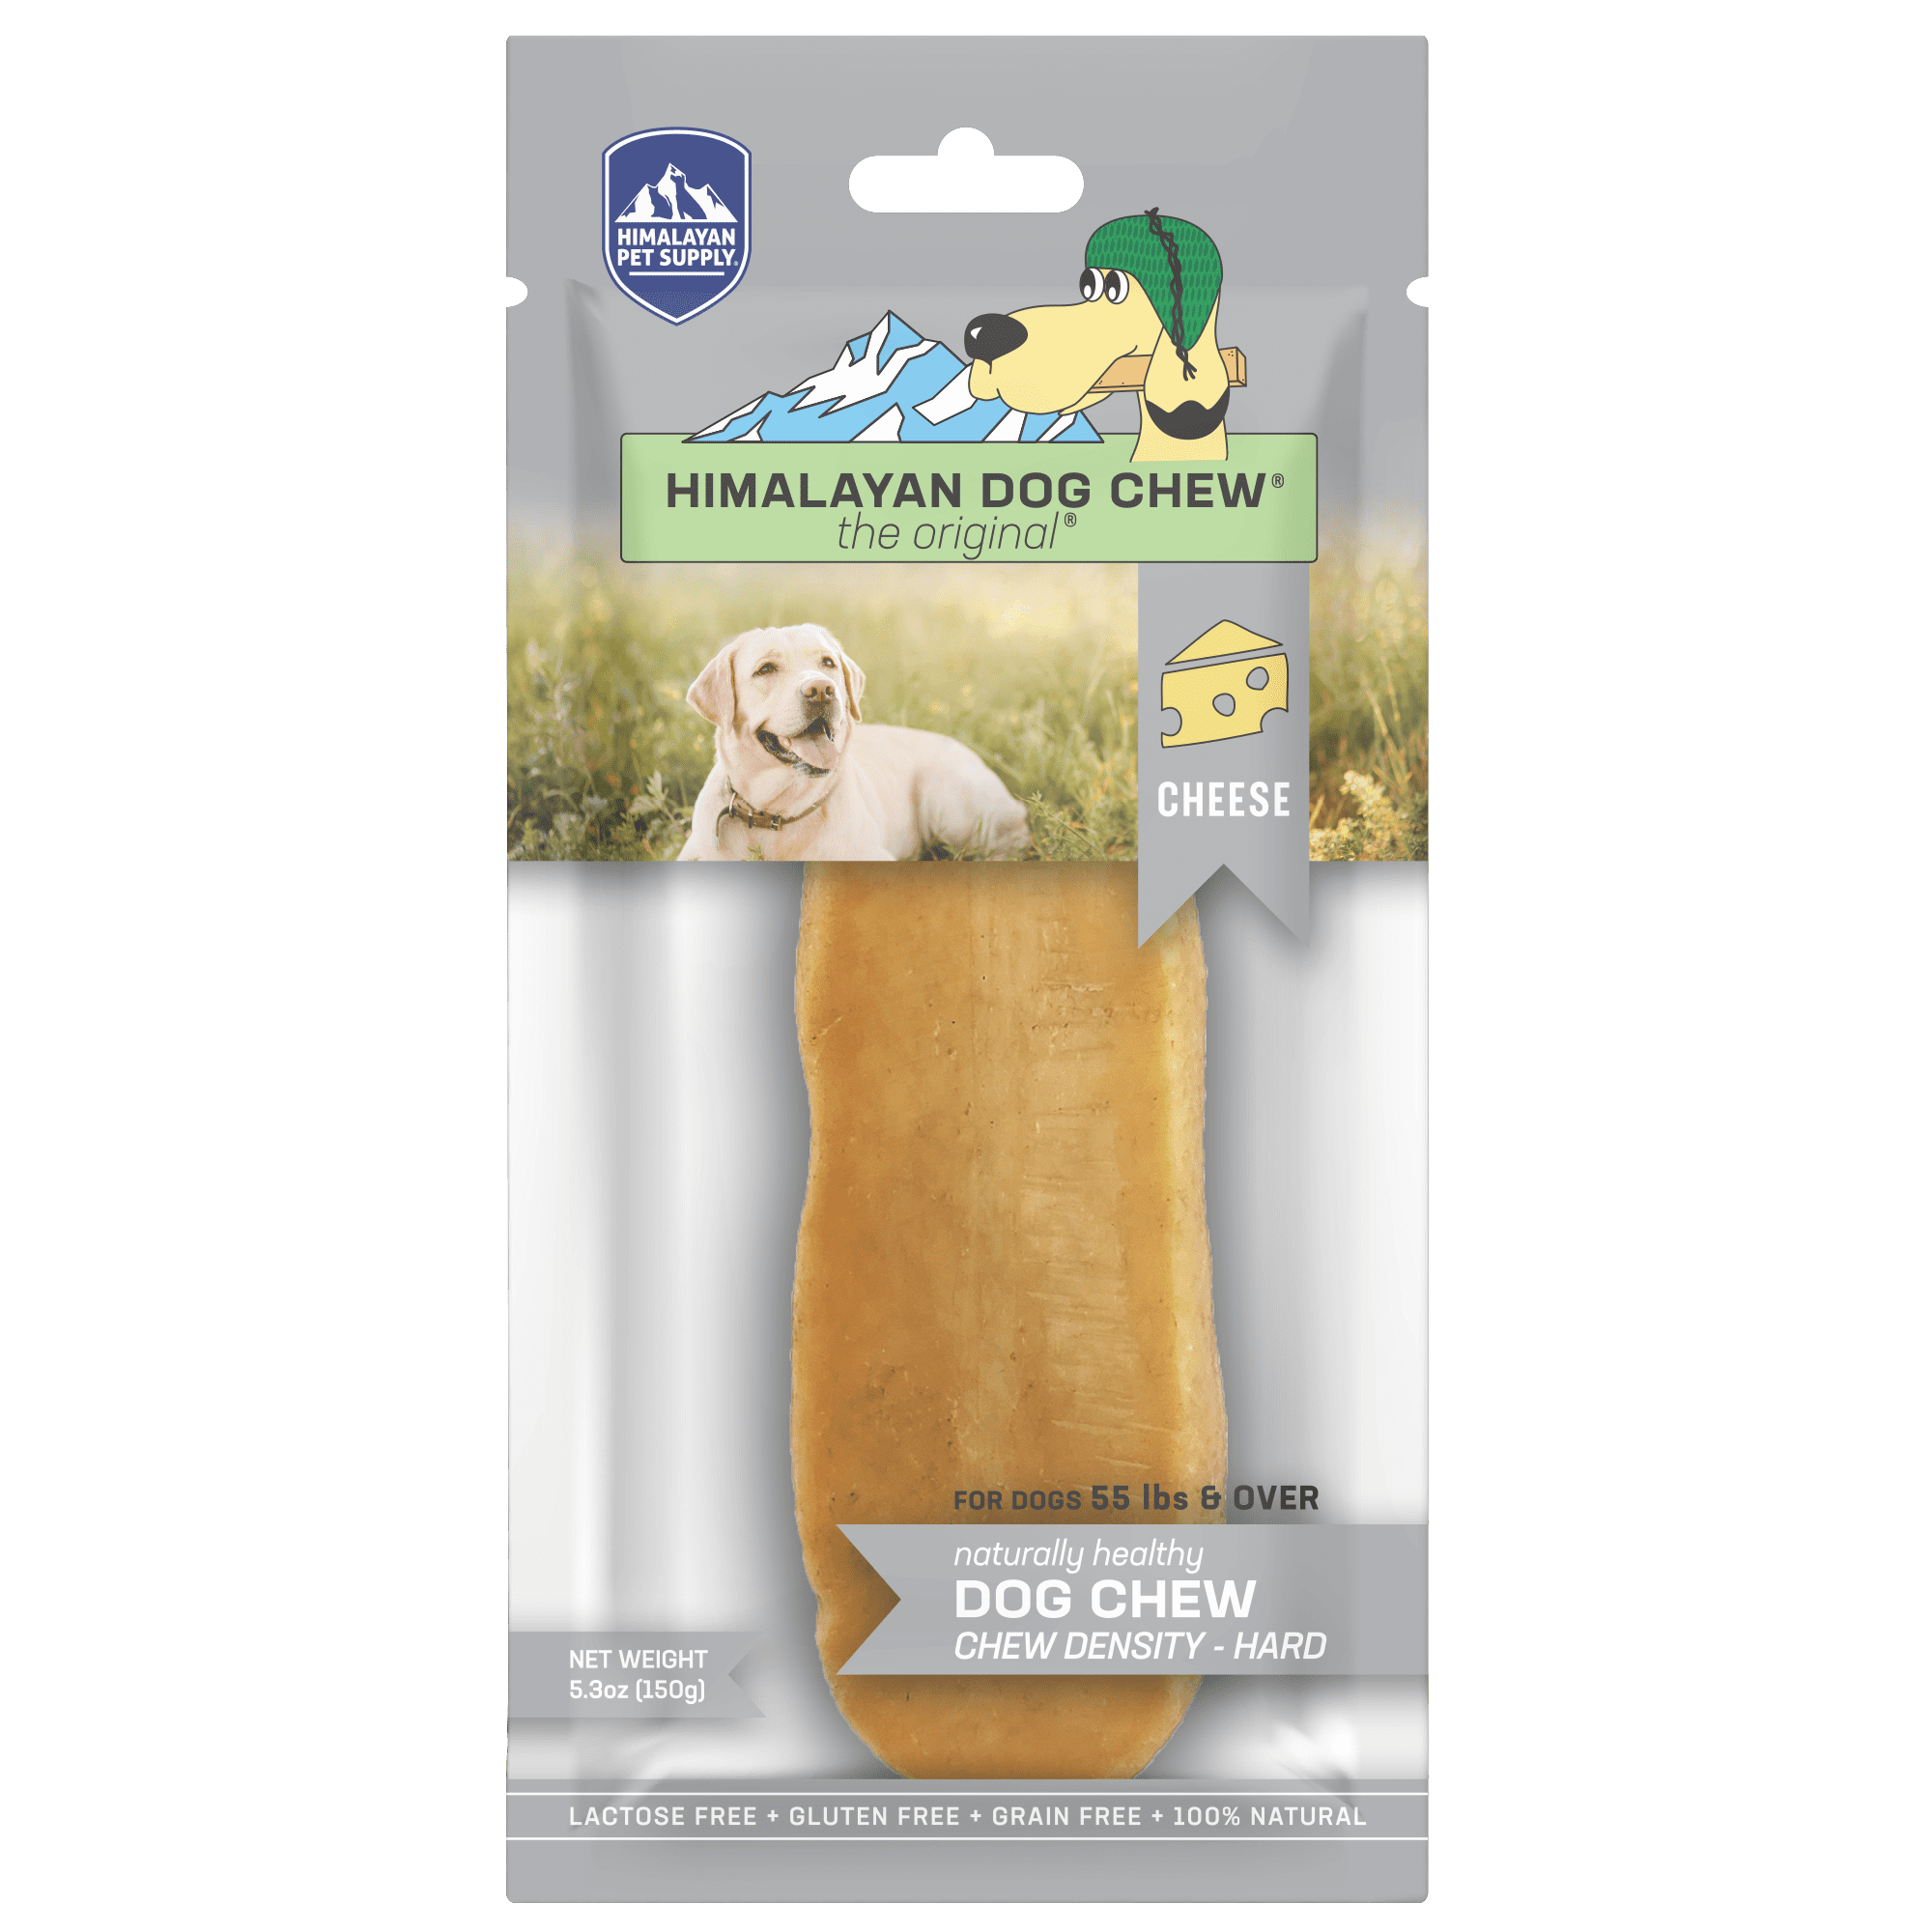 Long Lasting Dog Chew Treats for Light Chewers Nature Gnaws Yak Chews for Small Dogs Premium Natural Hard Cheese Bones Rawhide Free 